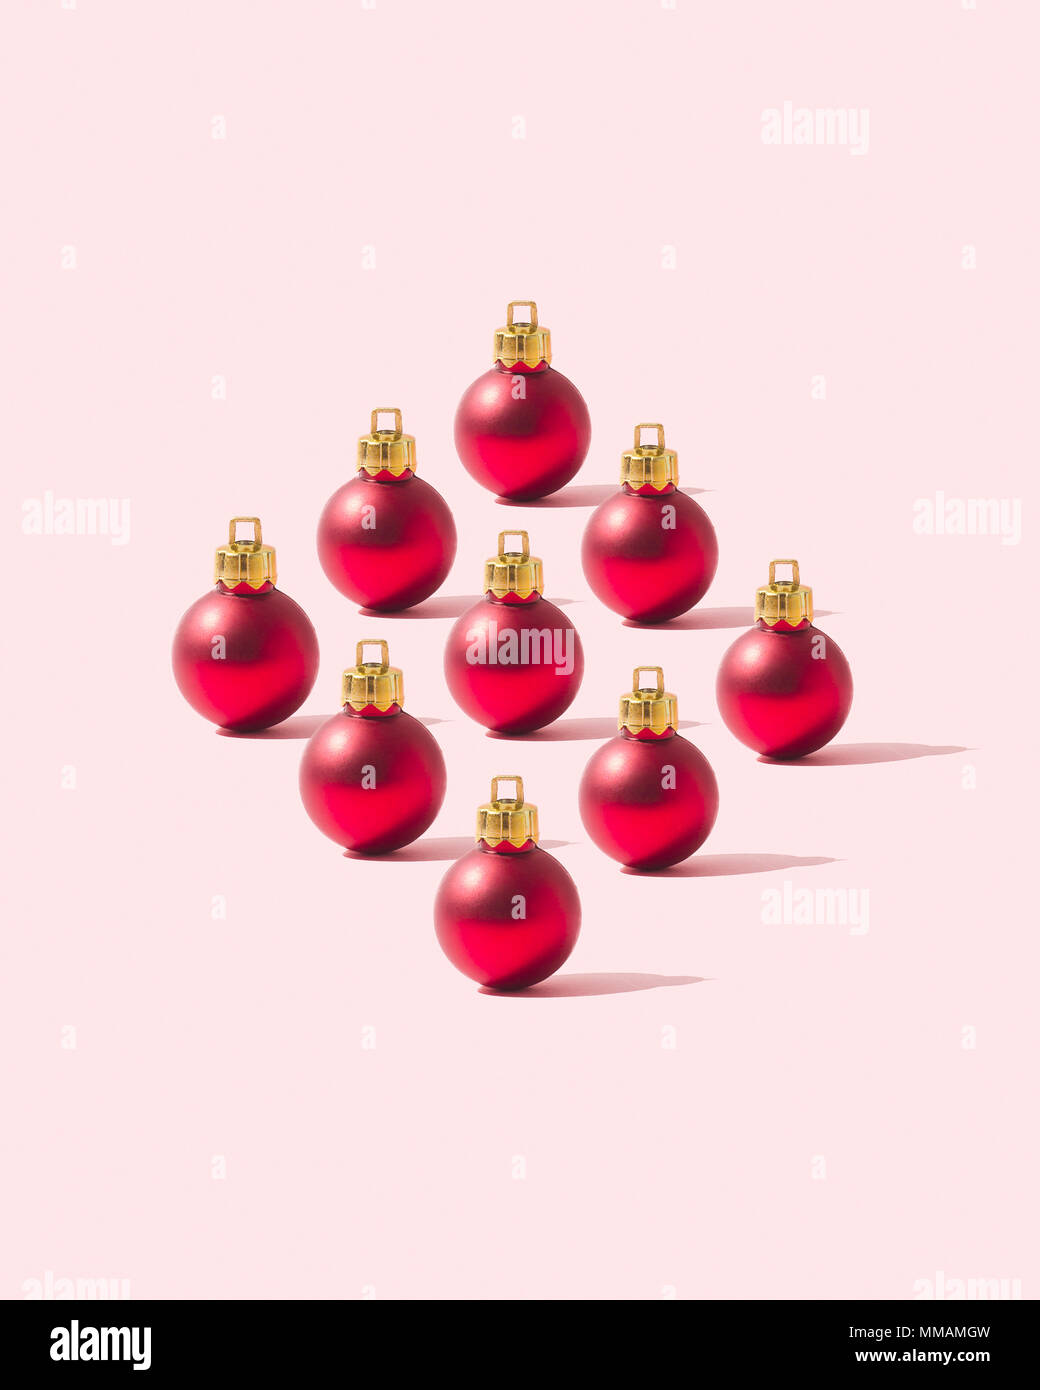 Red Christmas baubles organized in a rhombus shape over pink background Stock Photo